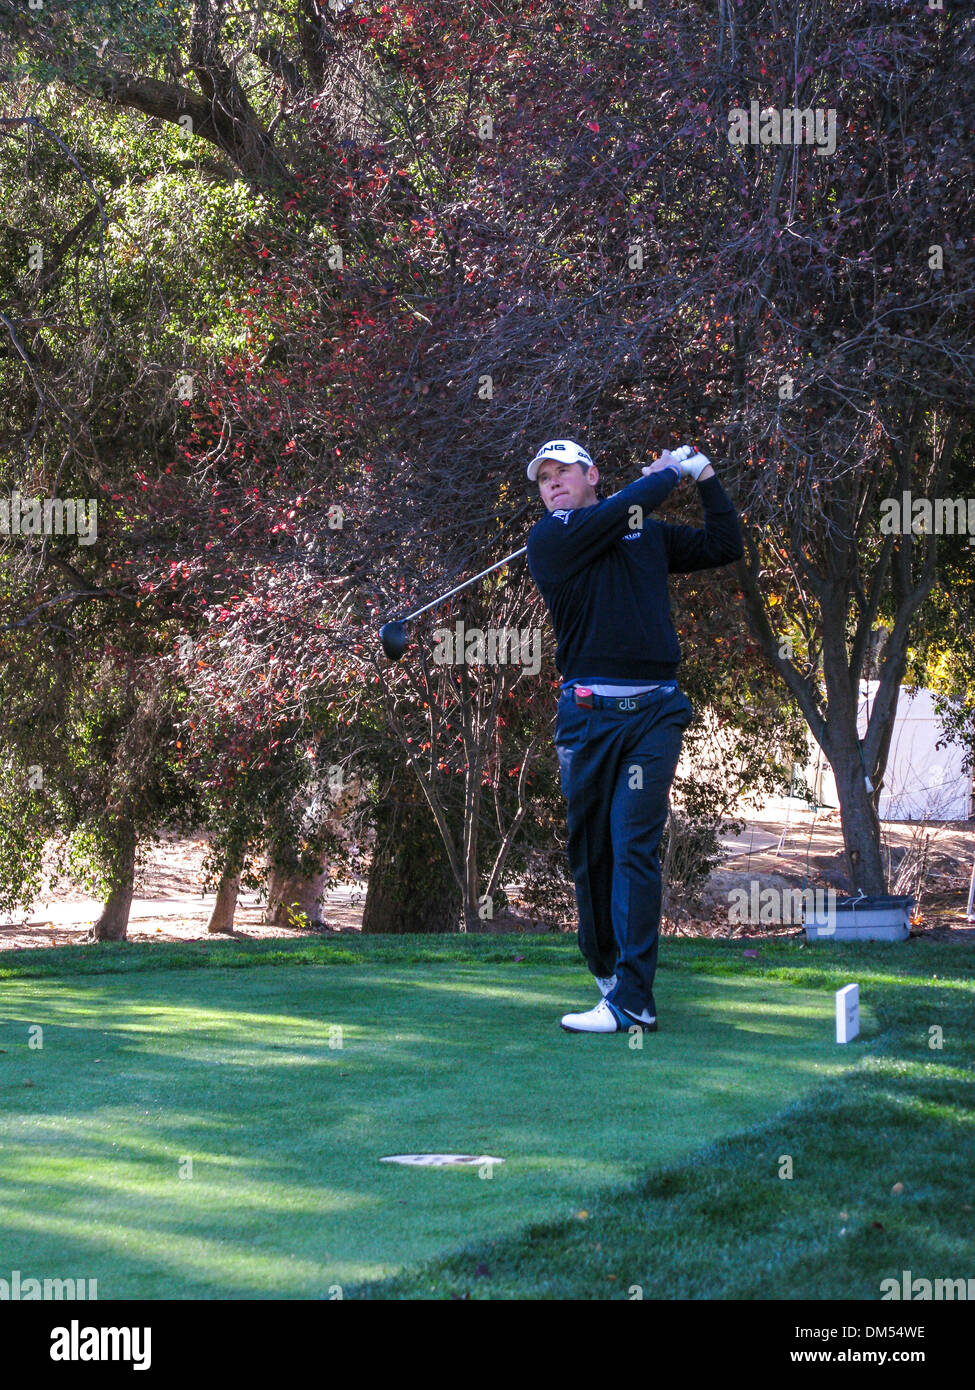 Lee Westwood at the second tee of the 2013 Northwestern Mutual Challenge in Thousand Oaks California Stock Photo